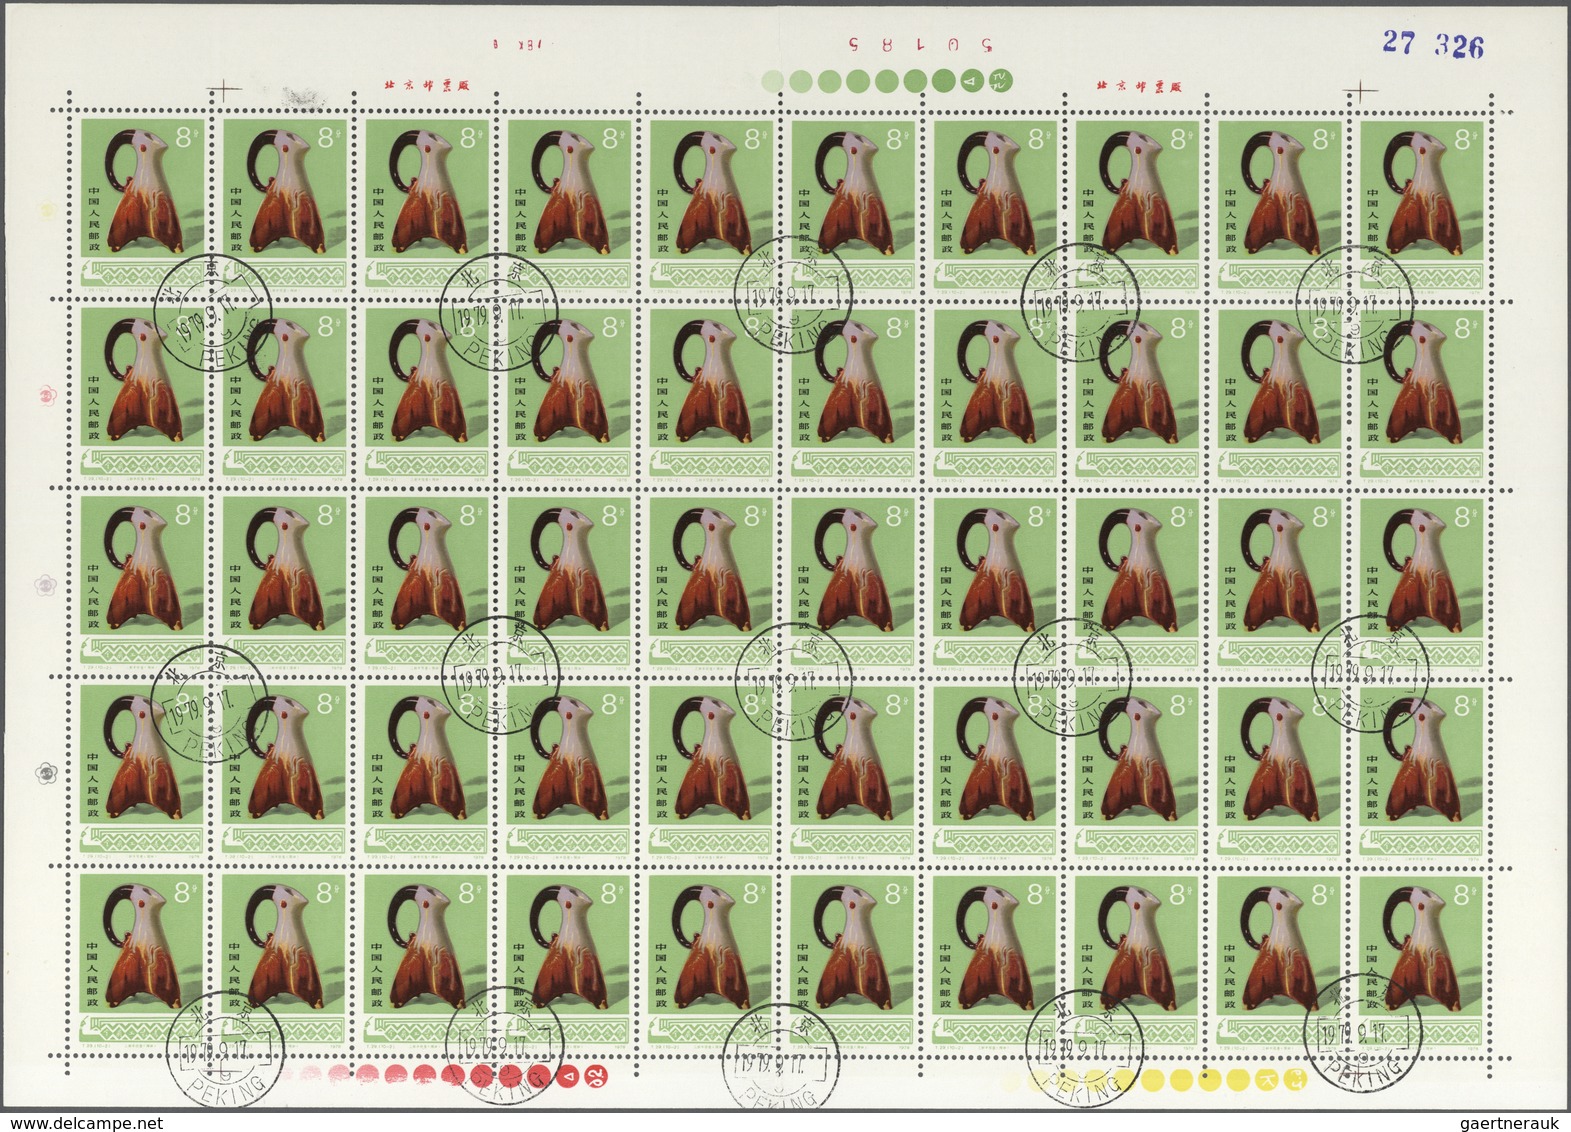 China - Volksrepublik: 1978, Arts and Crafts (T29), 50 complete sets of 10 as full sheets, CTO cance